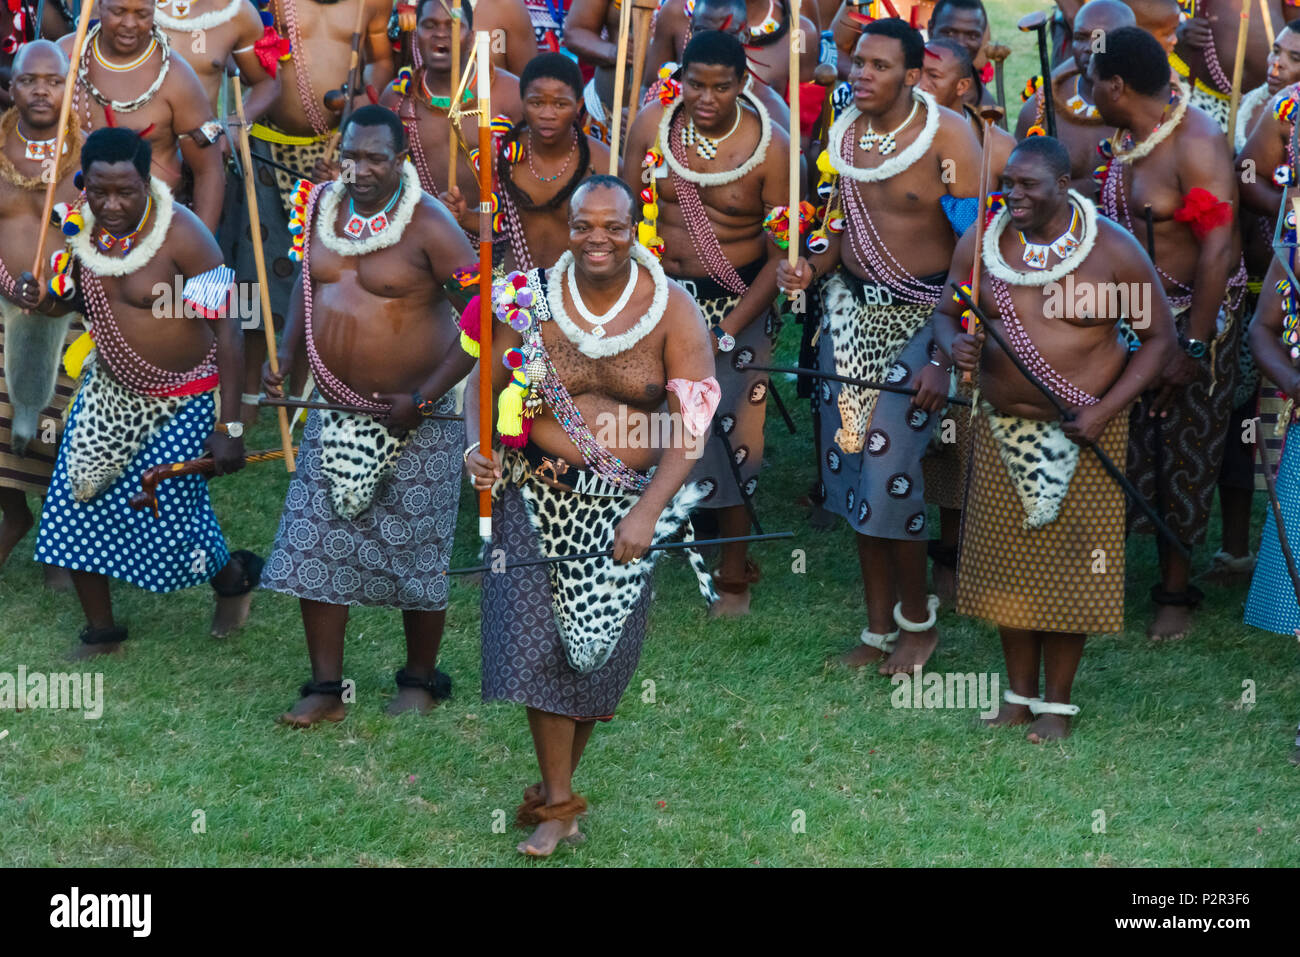 Swazi king (holding red scepter stick) and his warriors parade with girls at Umhlanga (Reed Dance Festival), Swaziland Stock Photo